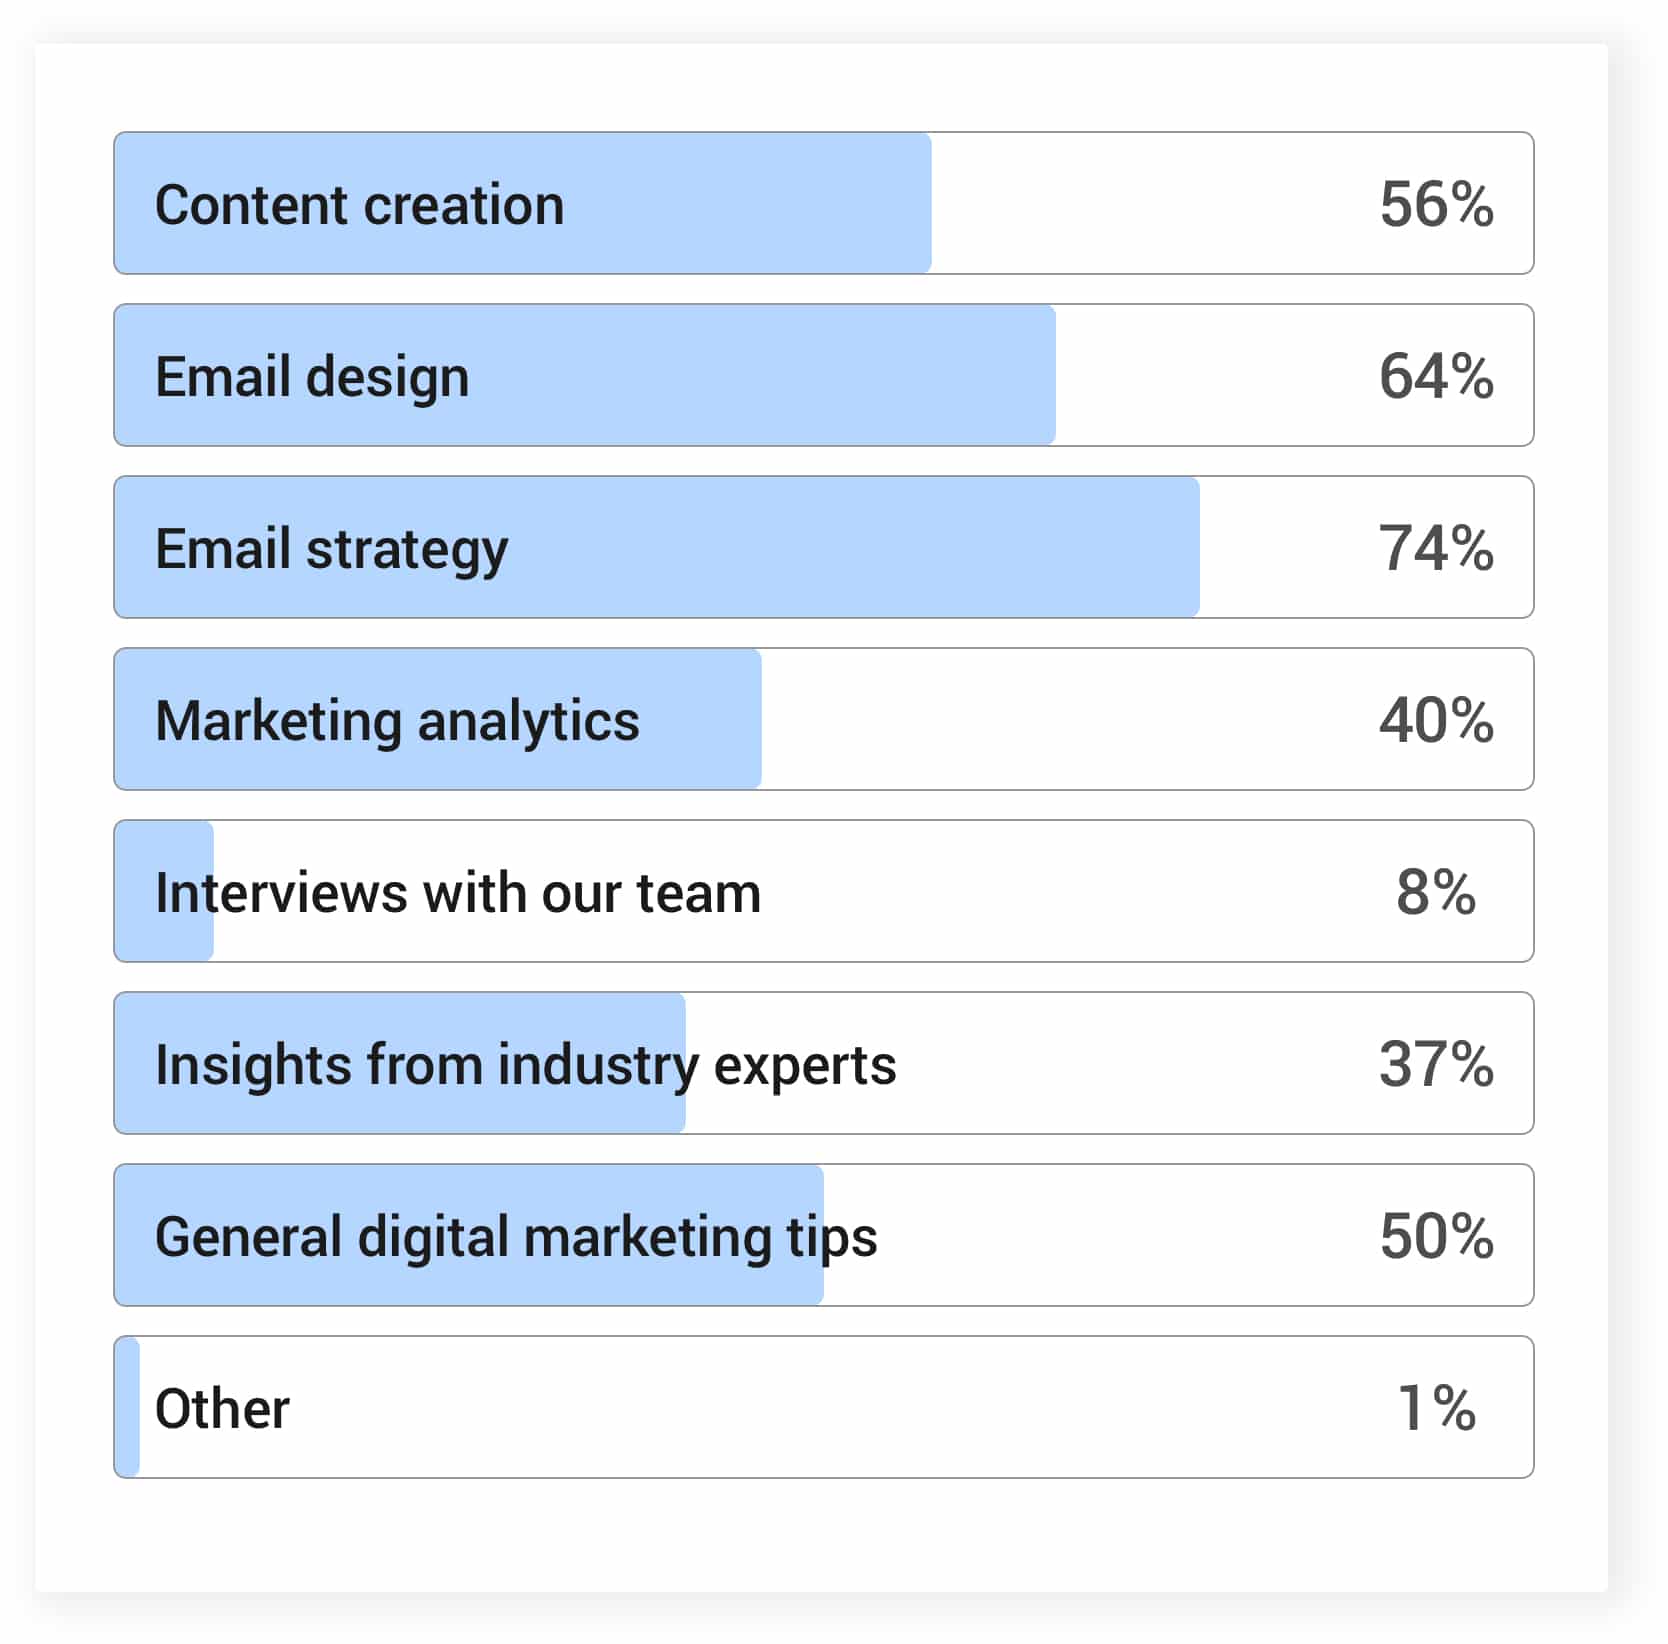 Content creation: 56%; Email design: 64%; Email strategy: 74%; Marketing analytics: 40%; Interviews with our team: 8%; Insights from industry experts: 37%